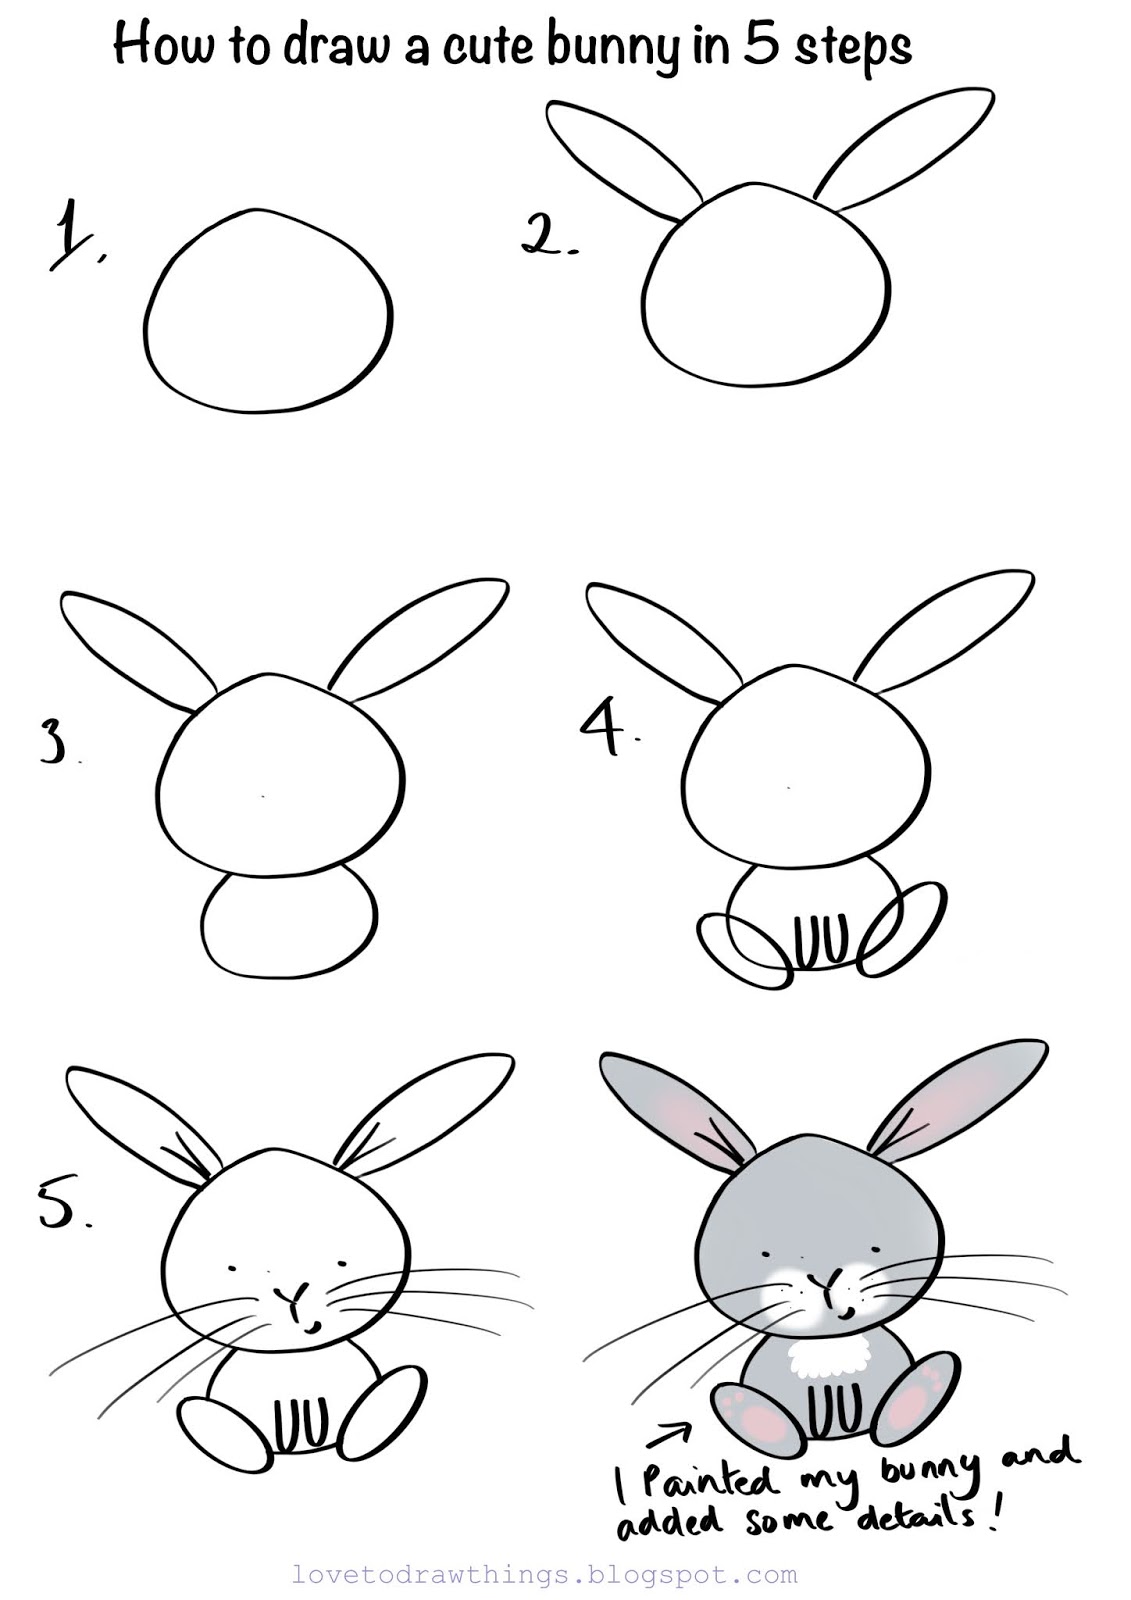 How To Draw A Bunny Easy Step By Step Tutorial With Printable | All in